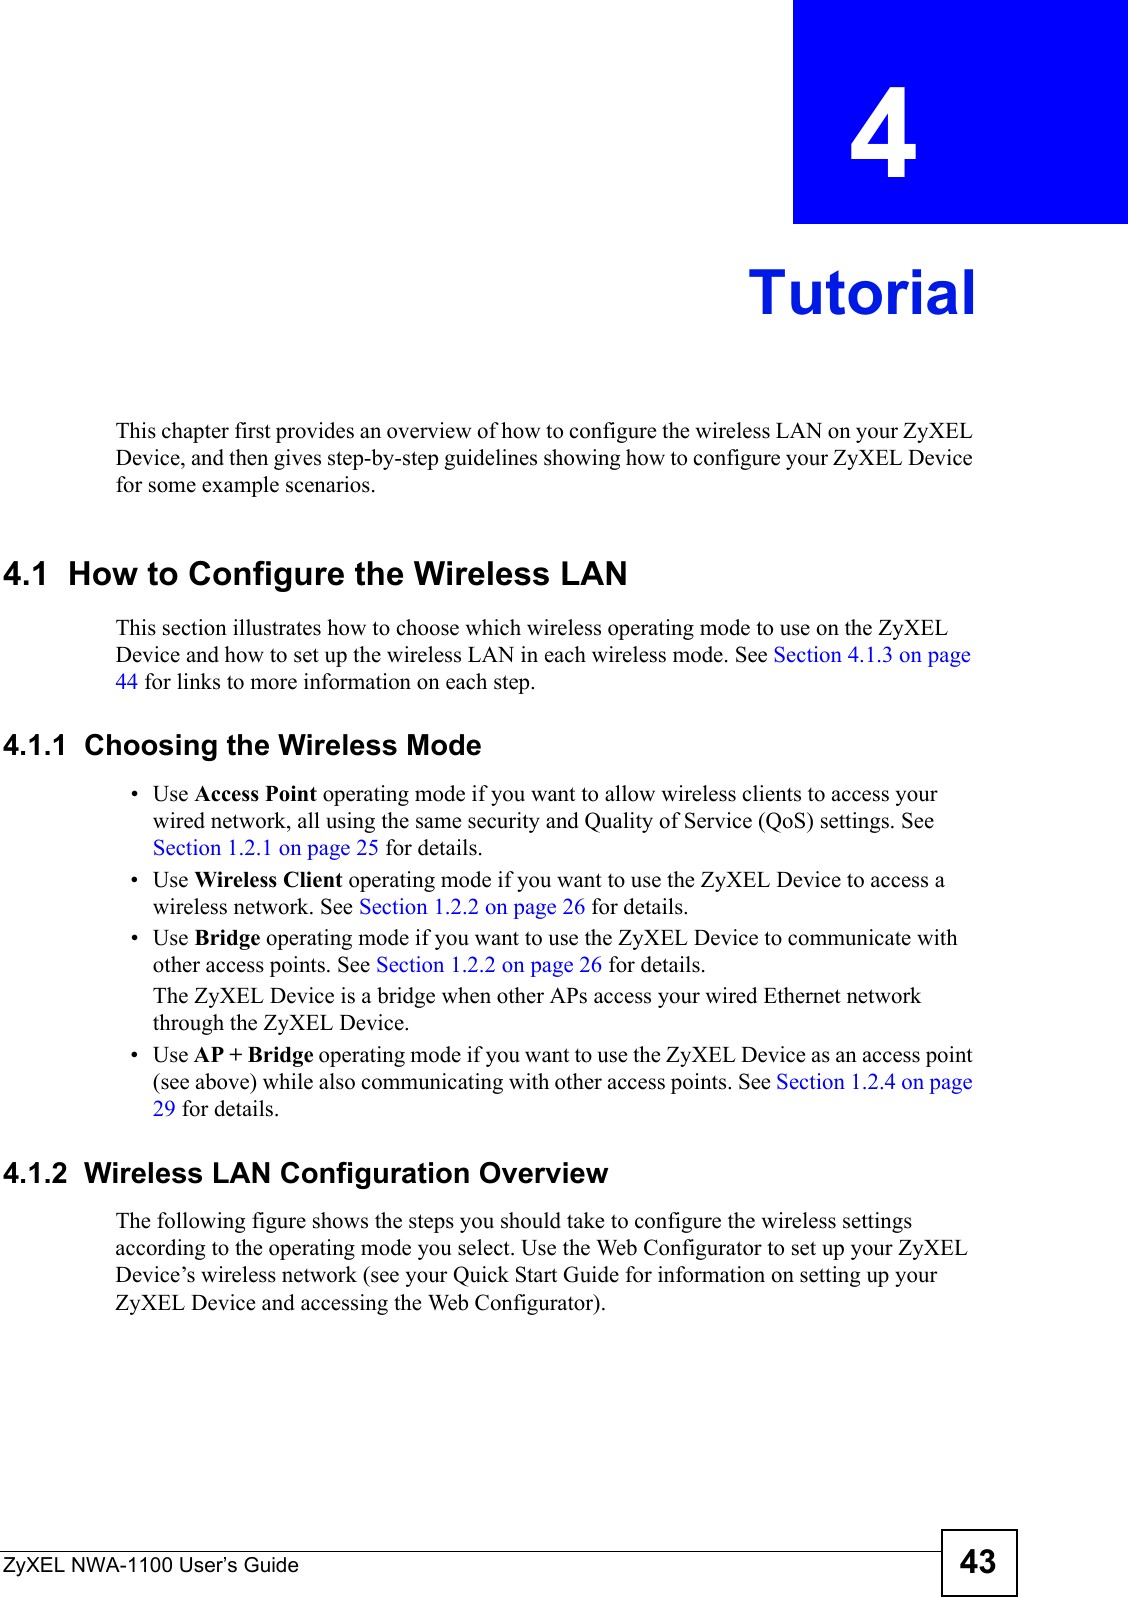 ZyXEL NWA-1100 User’s Guide 43CHAPTER  4 TutorialThis chapter first provides an overview of how to configure the wireless LAN on your ZyXEL Device, and then gives step-by-step guidelines showing how to configure your ZyXEL Device for some example scenarios. 4.1  How to Configure the Wireless LANThis section illustrates how to choose which wireless operating mode to use on the ZyXEL Device and how to set up the wireless LAN in each wireless mode. See Section 4.1.3 on page 44 for links to more information on each step.4.1.1  Choosing the Wireless Mode•Use Access Point operating mode if you want to allow wireless clients to access your wired network, all using the same security and Quality of Service (QoS) settings. See Section 1.2.1 on page 25 for details.•Use Wireless Client operating mode if you want to use the ZyXEL Device to access a wireless network. See Section 1.2.2 on page 26 for details.•Use Bridge operating mode if you want to use the ZyXEL Device to communicate with other access points. See Section 1.2.2 on page 26 for details.The ZyXEL Device is a bridge when other APs access your wired Ethernet network through the ZyXEL Device.•Use AP + Bridge operating mode if you want to use the ZyXEL Device as an access point (see above) while also communicating with other access points. See Section 1.2.4 on page 29 for details.4.1.2  Wireless LAN Configuration OverviewThe following figure shows the steps you should take to configure the wireless settings according to the operating mode you select. Use the Web Configurator to set up your ZyXEL Device’s wireless network (see your Quick Start Guide for information on setting up your ZyXEL Device and accessing the Web Configurator).